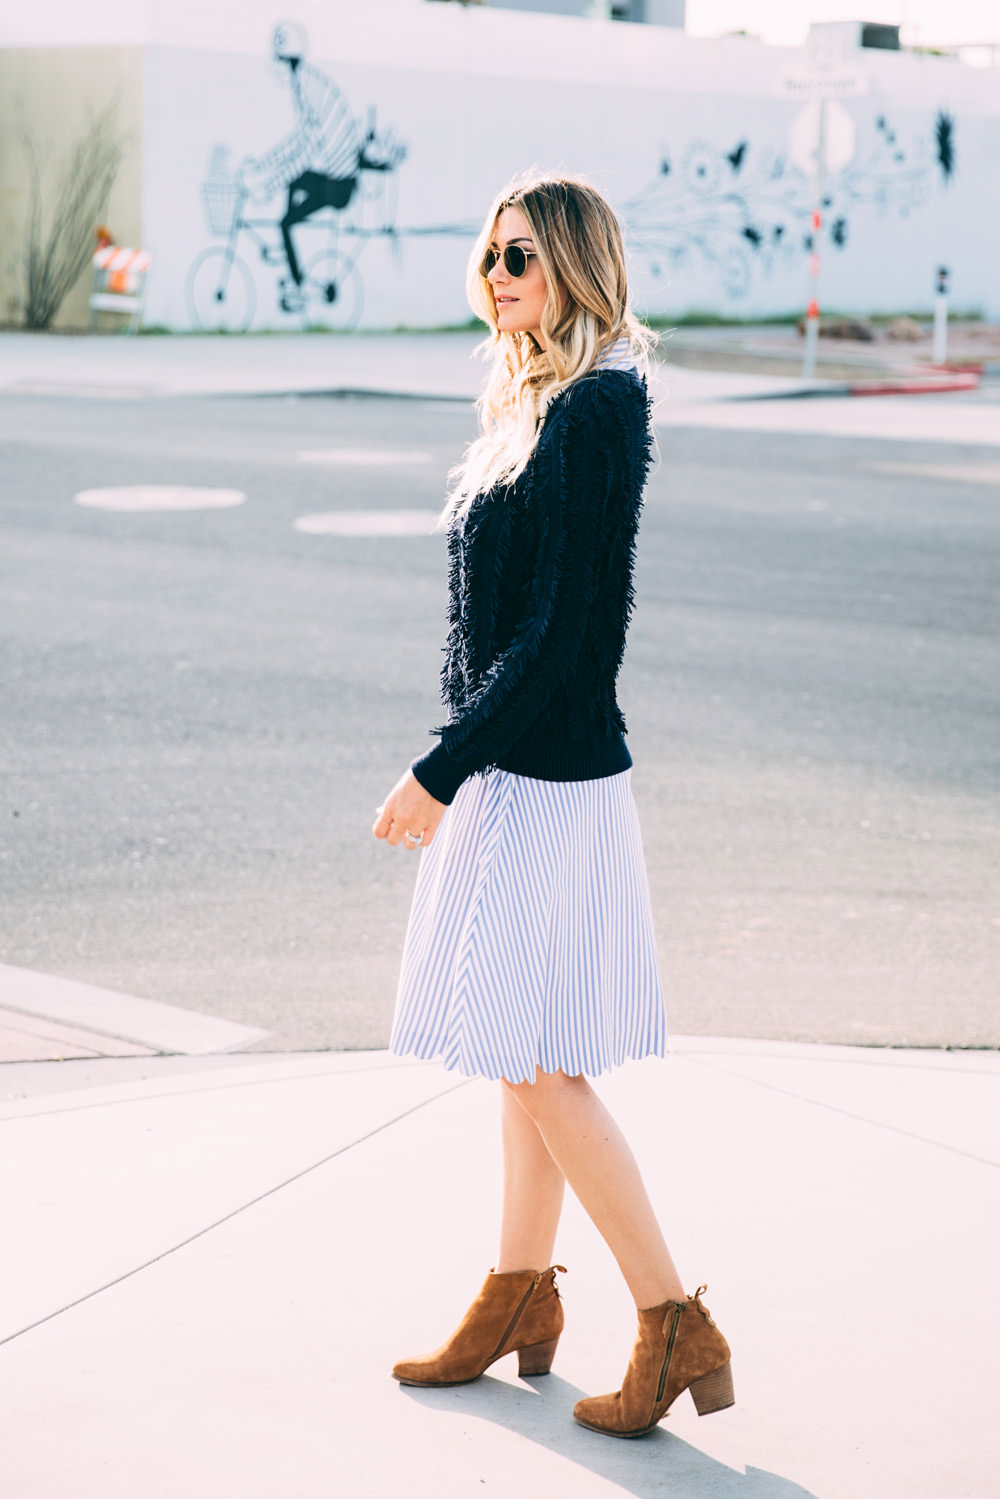 Caitlin Lindquist of Dash of Darling styles a Banana Republic stripe scalloped hem dress with suede boots and a fringe sweater for a fall transition outfit